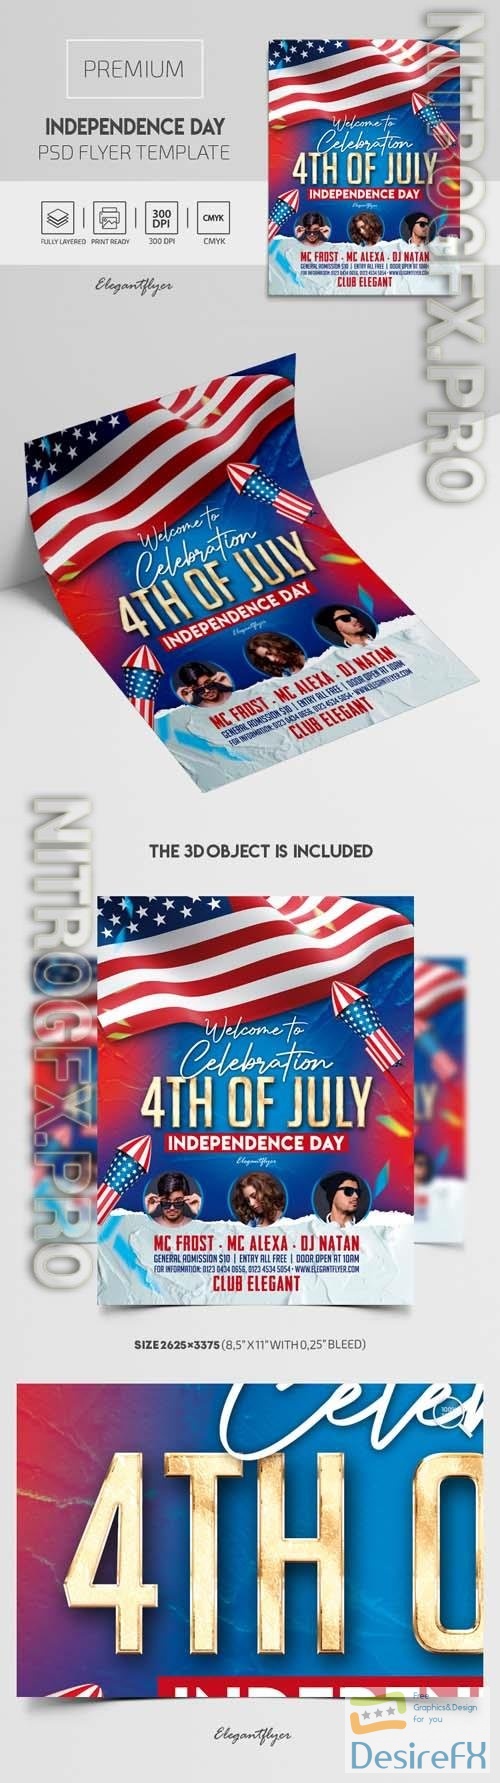 Independence Day Premium PSD Flyer Template